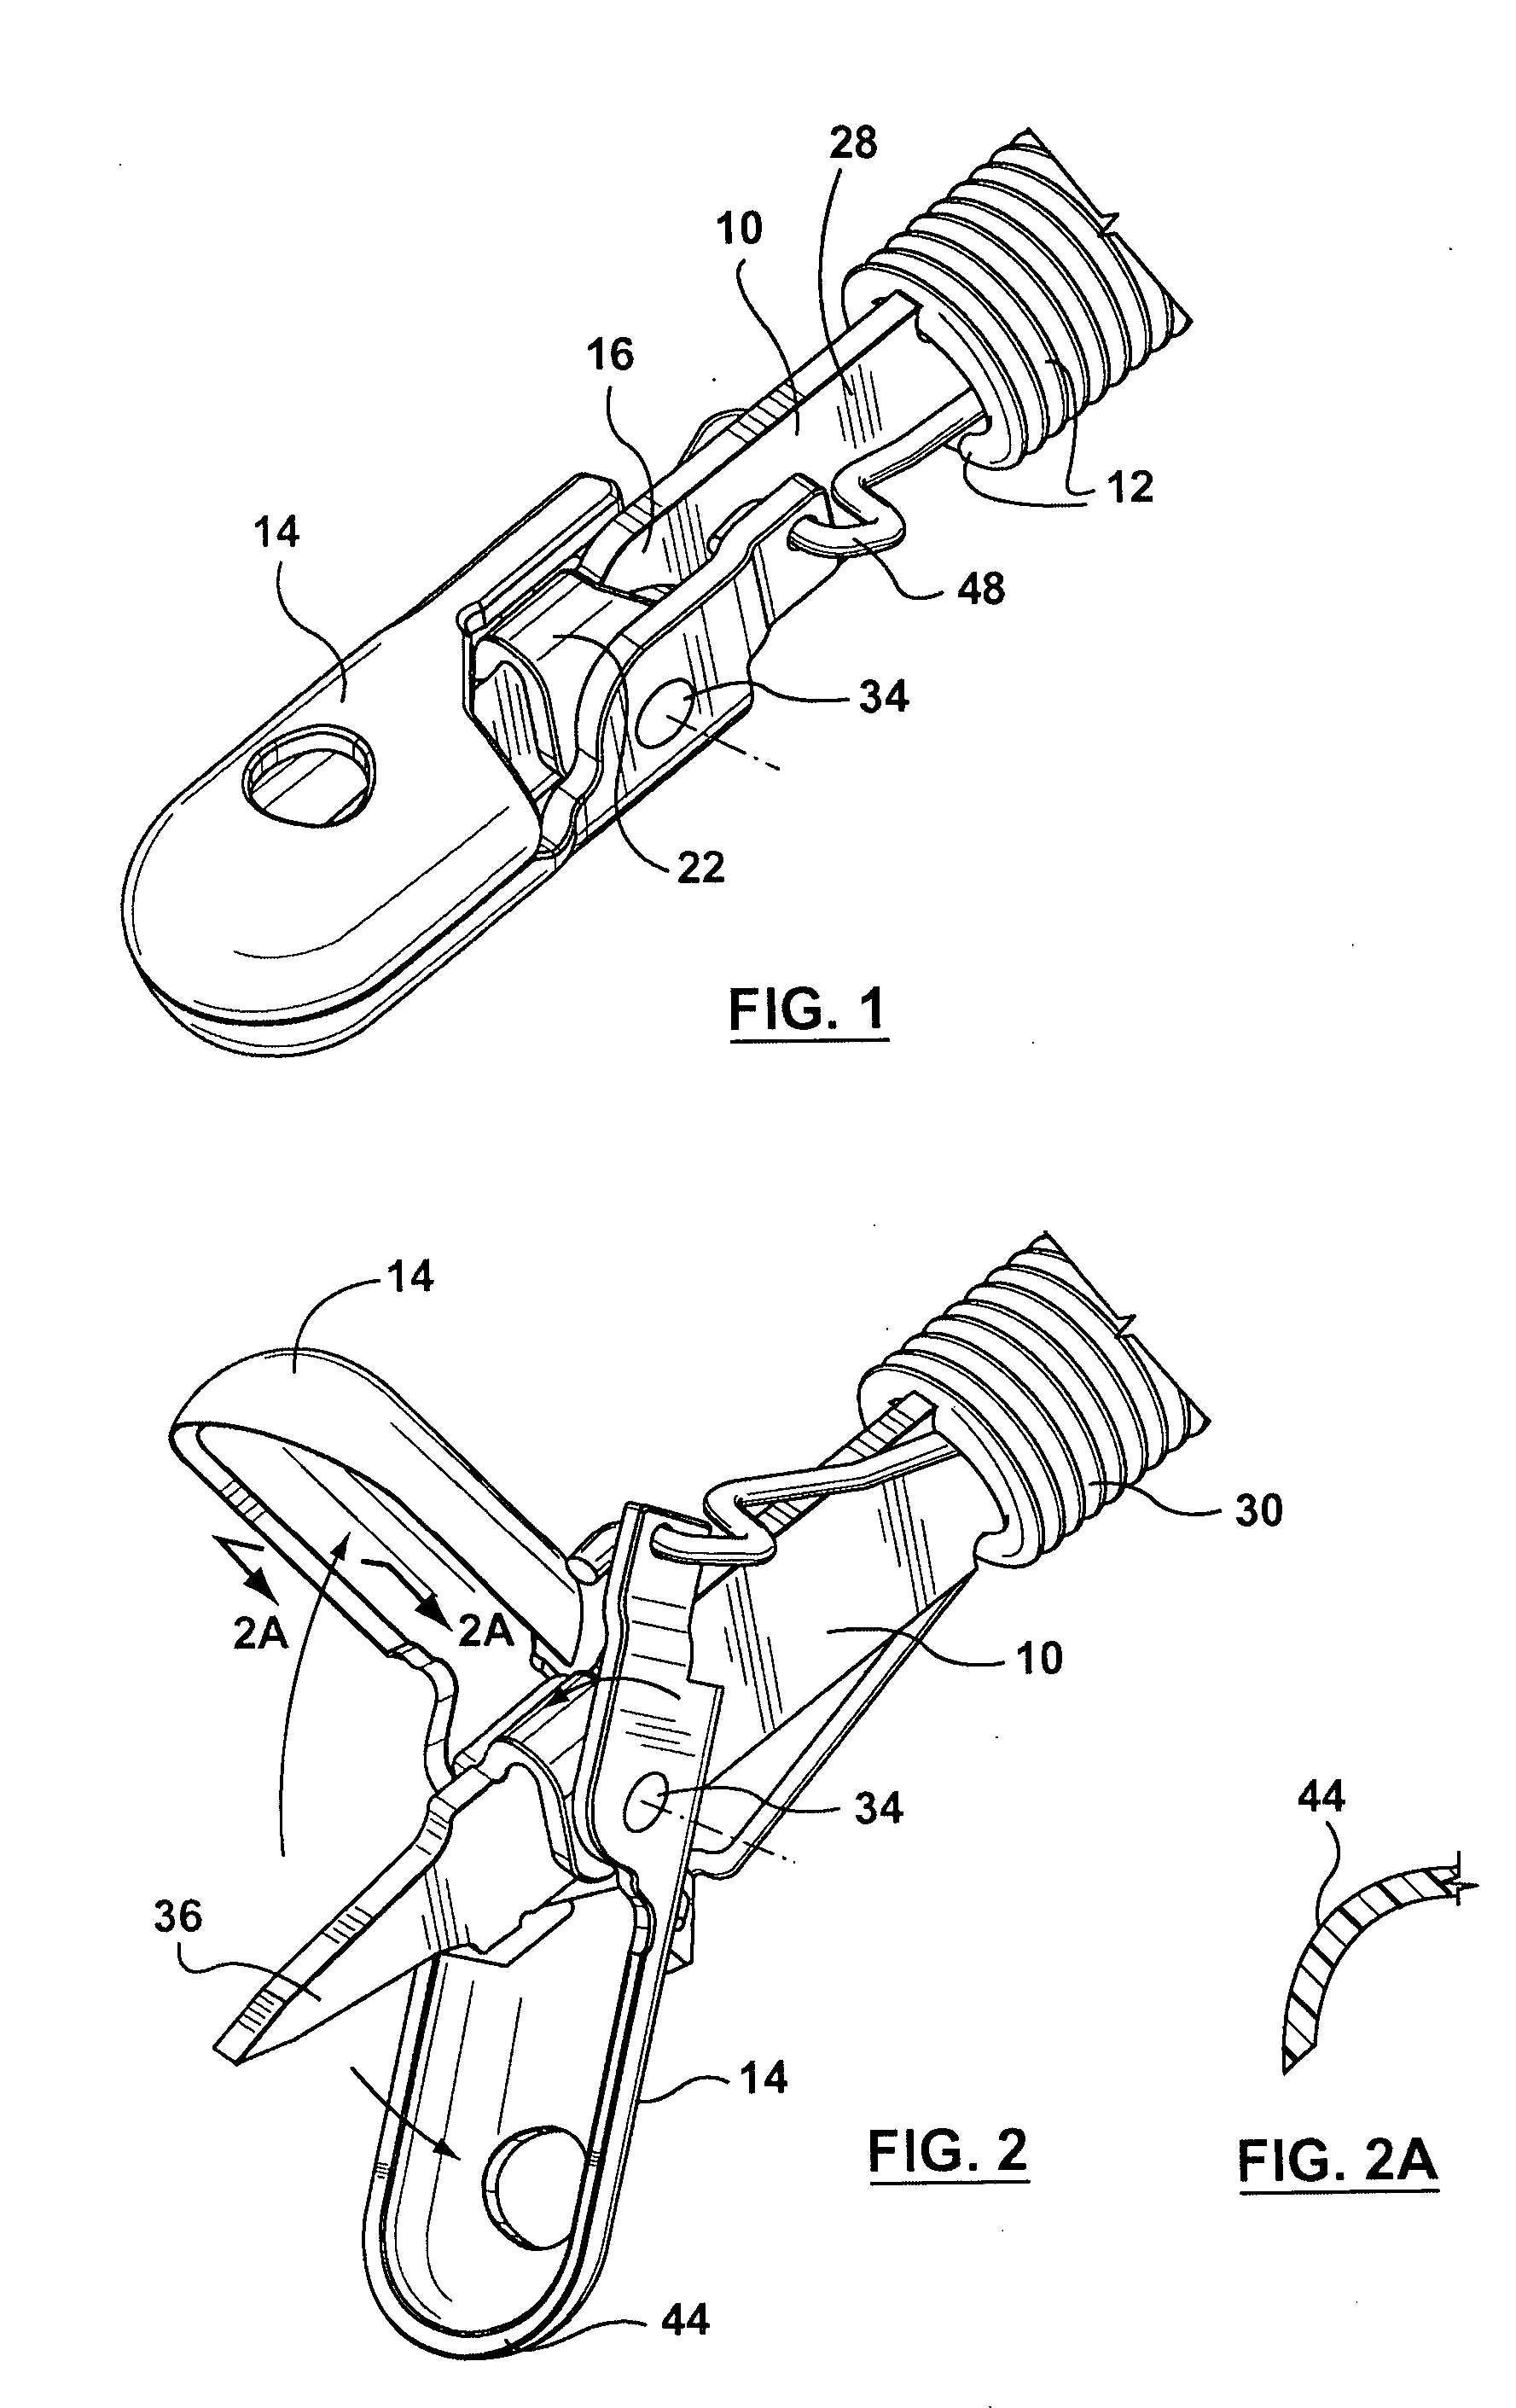 Variations of biopsy jaw and clevis and method of manufacture